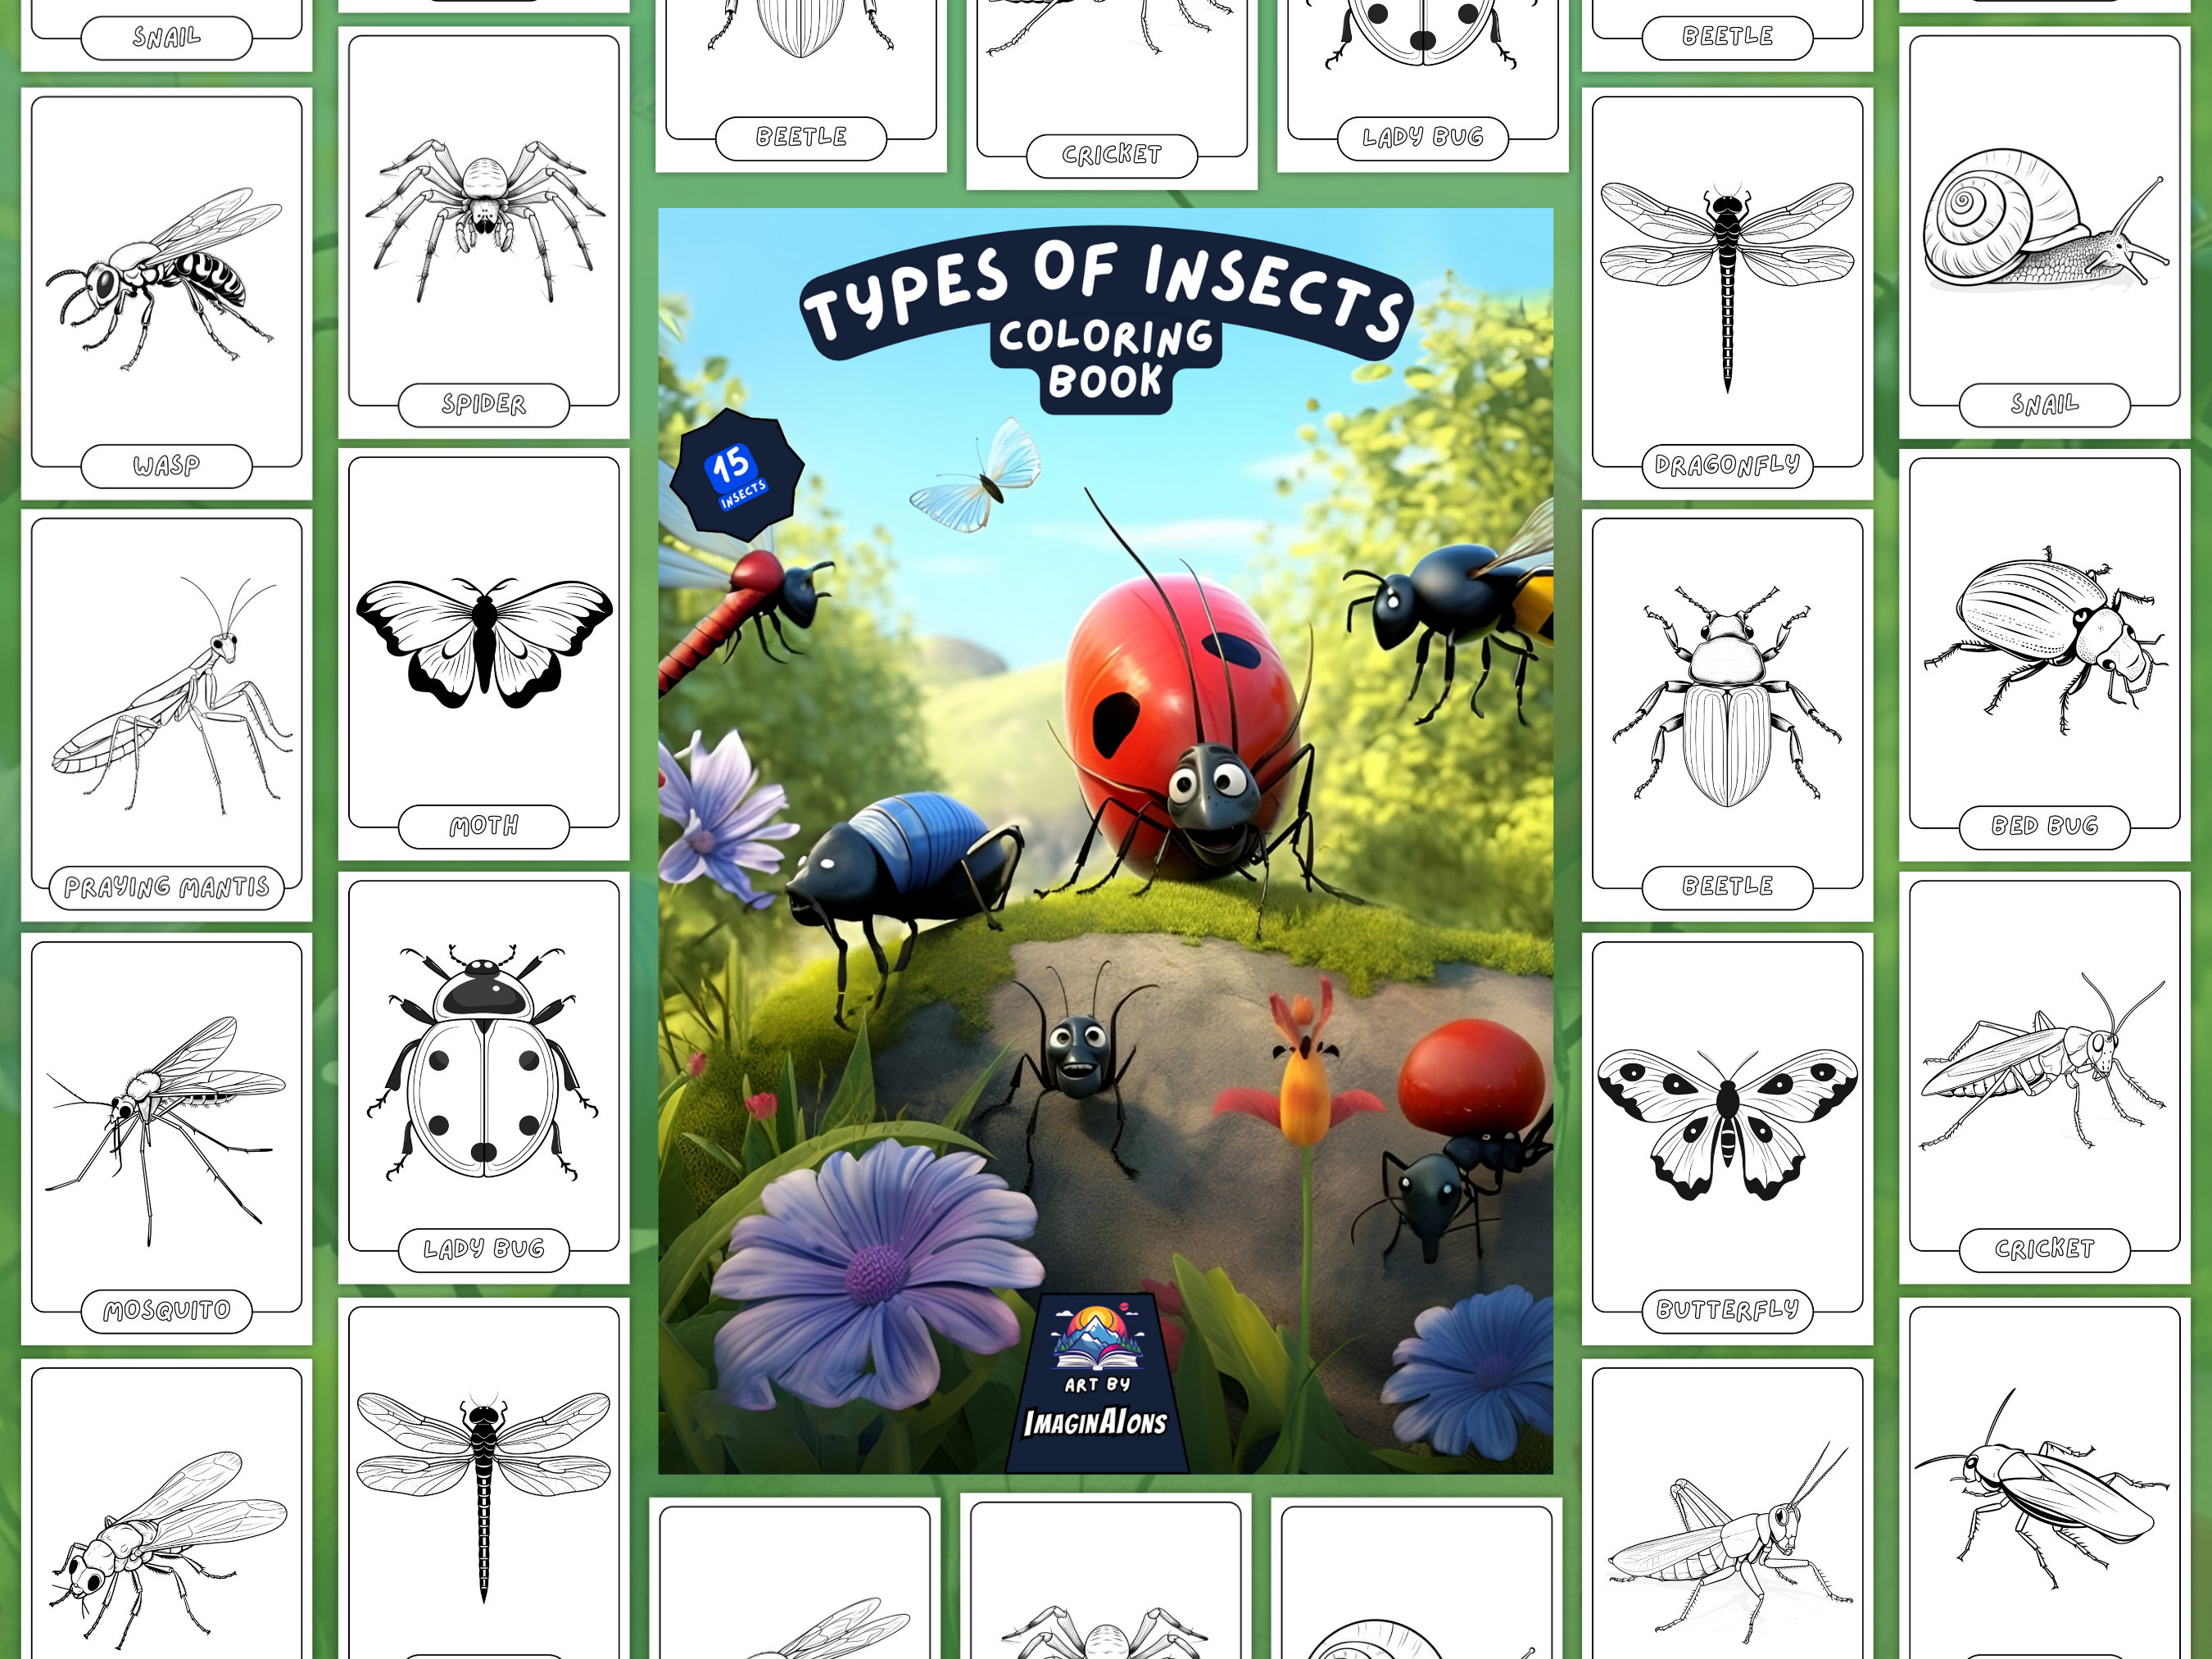 Hello Bugs & Insects Sticker Coloring Book 500 Stickers 12 Scenes Side by  Side Activity Book Design Fun Sticker Books for Kids 2-4 